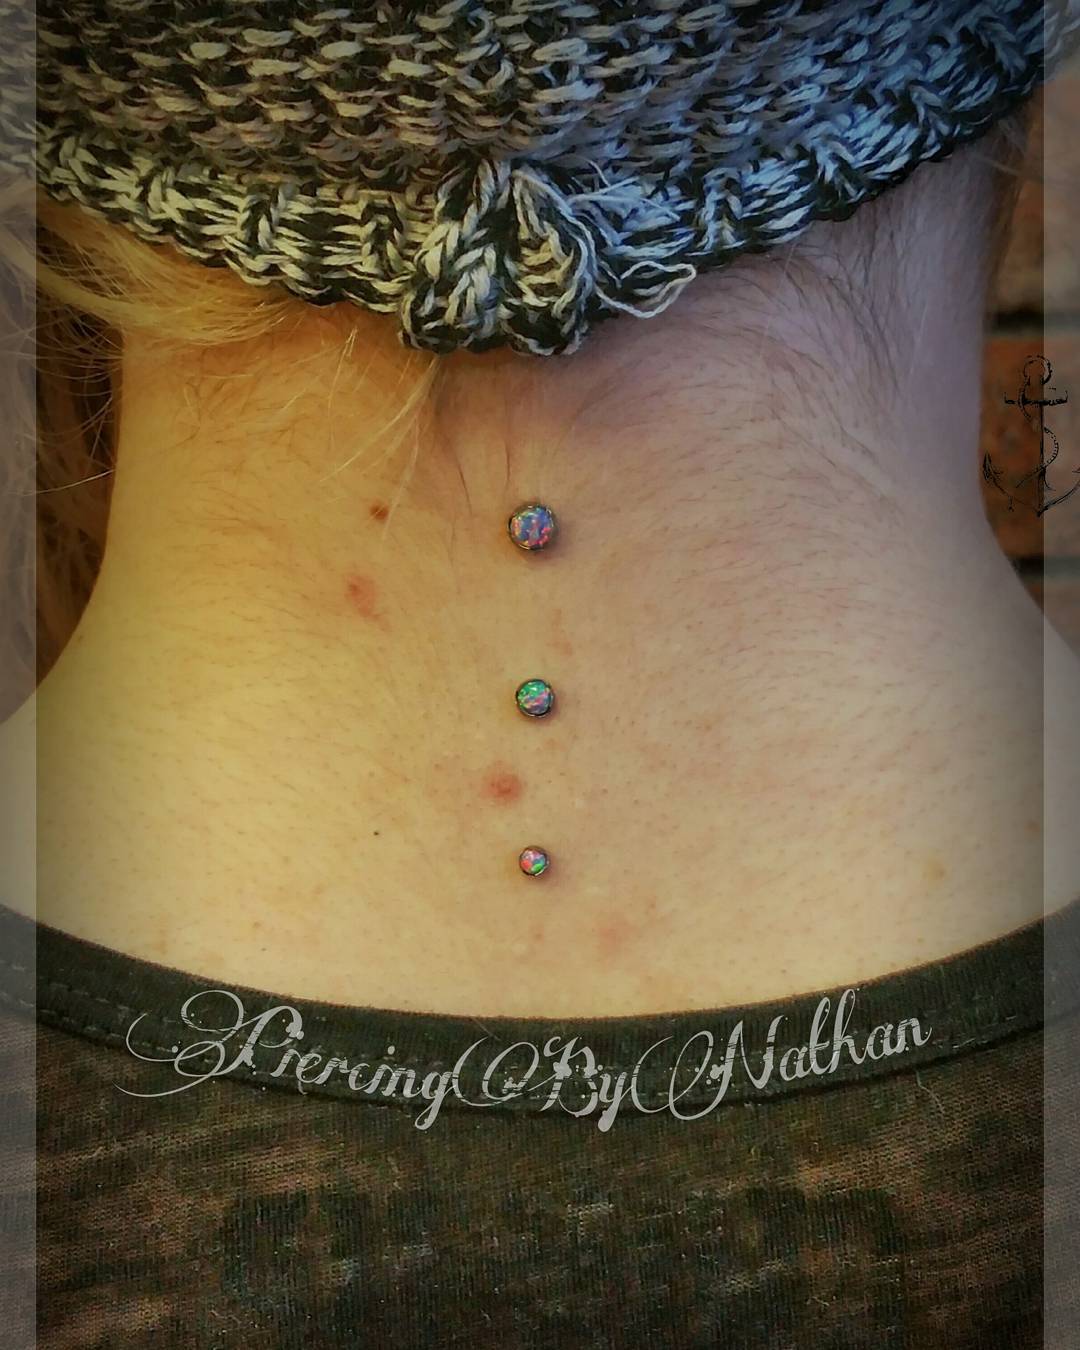 Colorful Anchors Piercing On Back Neck